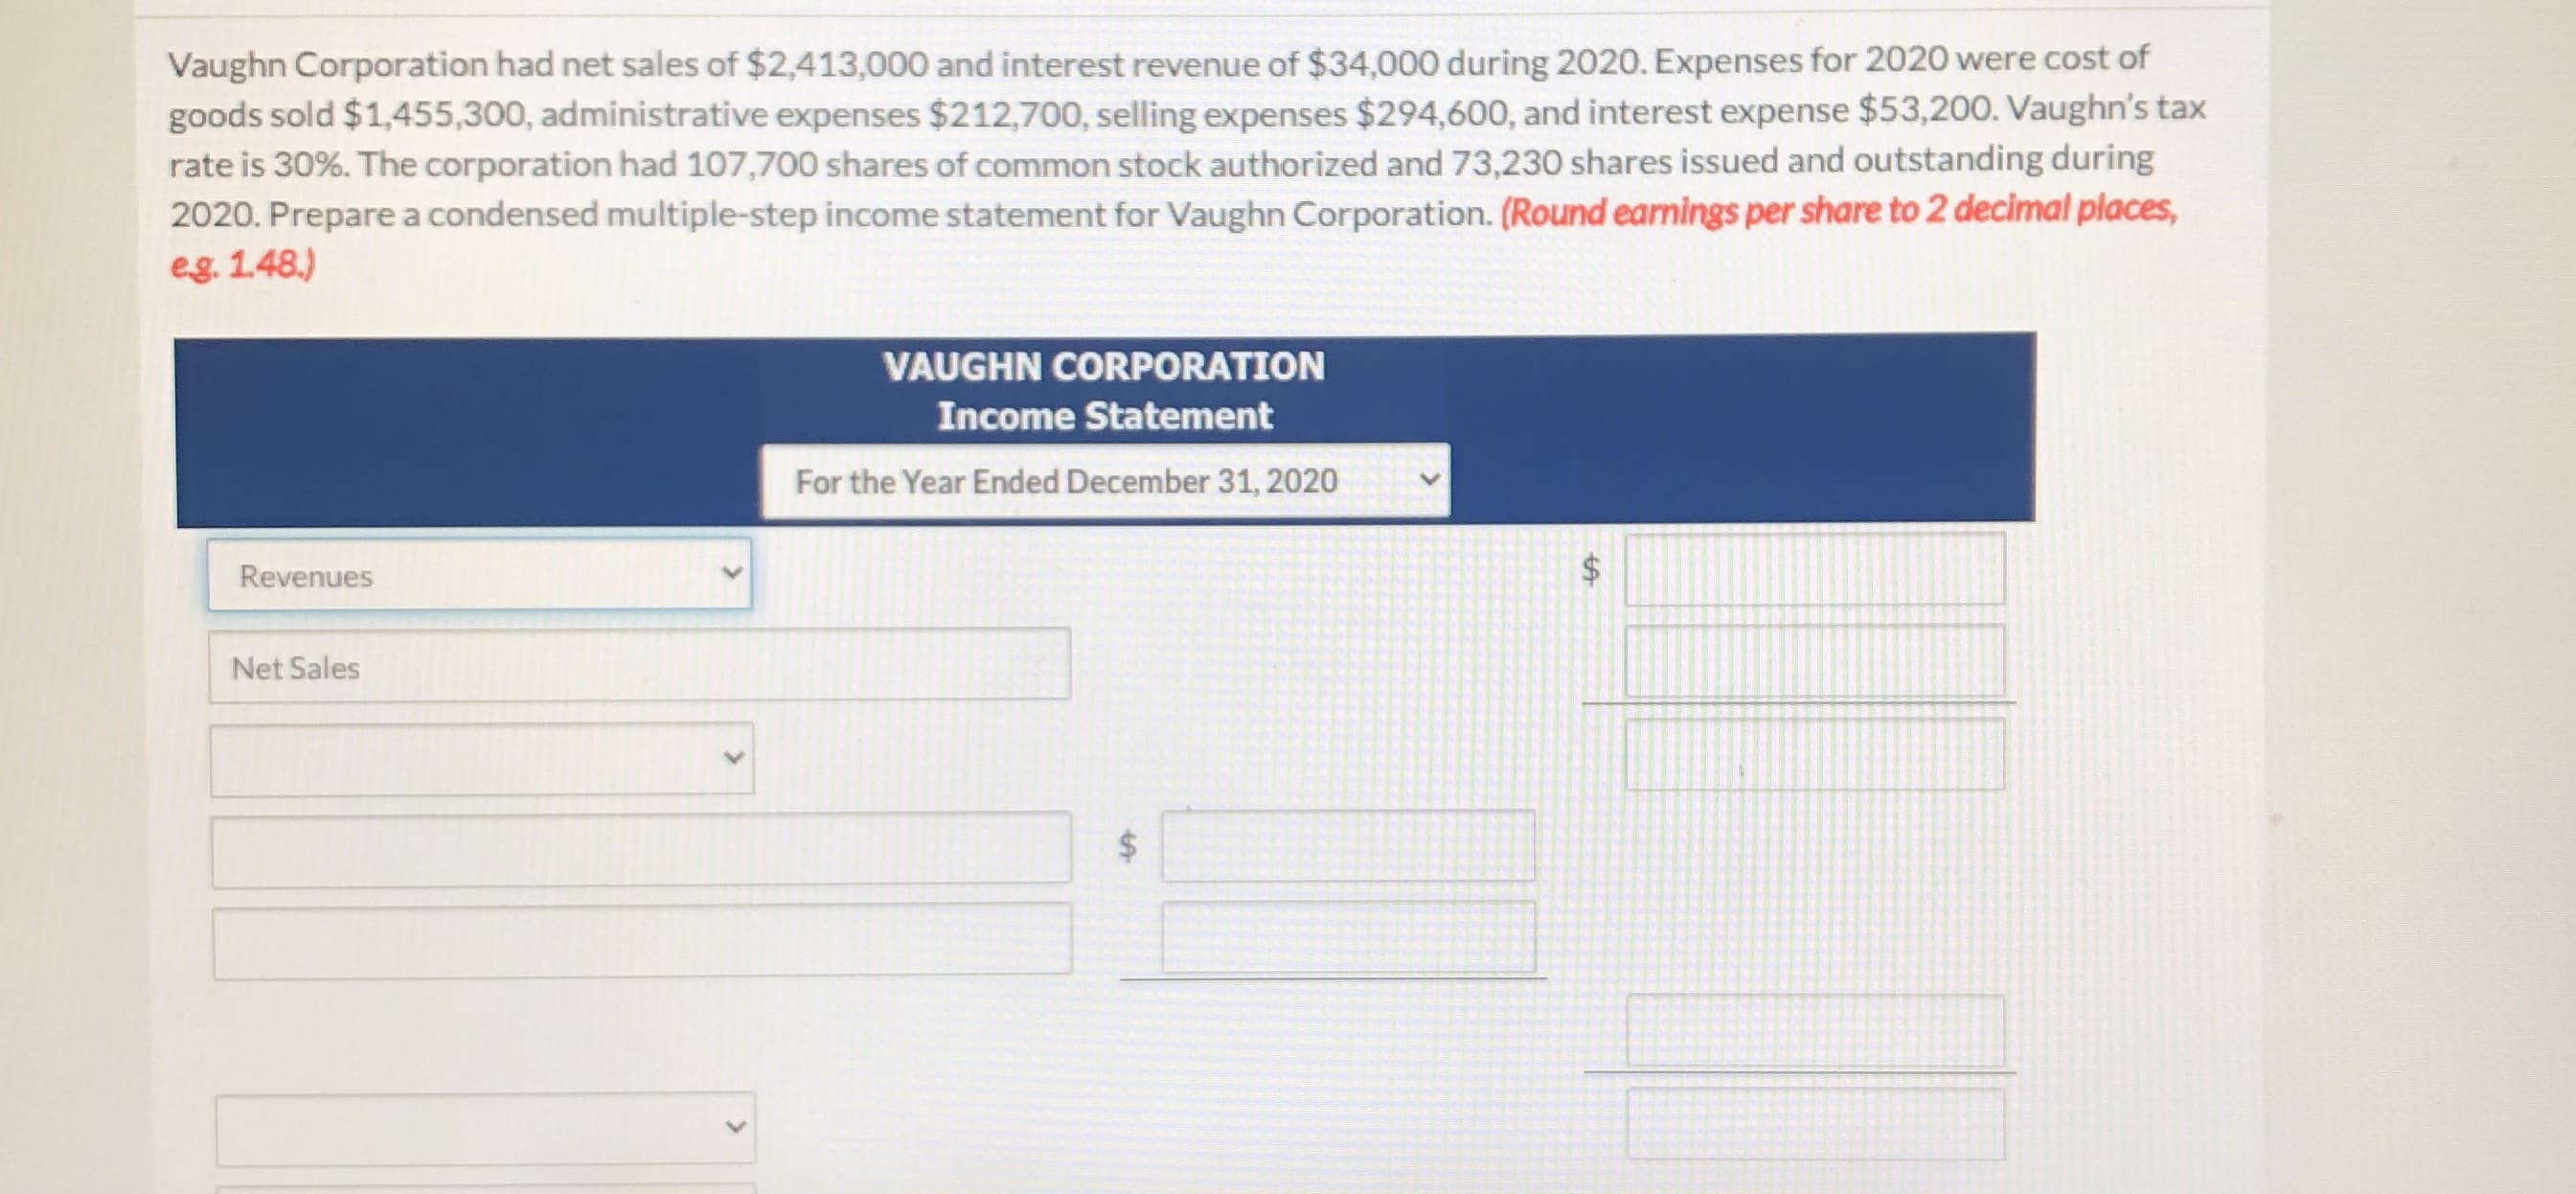 Vaughn Corporation had net sales of $2,413,000 and interest revenue of $34,000 during 2020. Expenses for 2020 were cost of
goods sold $1,455,300, administrative expenses $212,700, selling expenses $294,600, and interest expense $53,200. Vaughn's tax
rate is 30%. The corporation had 107,700 shares of common stock authorized and 73,230 shares issued and outstanding during
2020. Prepare a condensed multiple-step income statement for Vaughn Corporation. (Round earnings per share to 2 decimal places,
eg. 1.48.)
